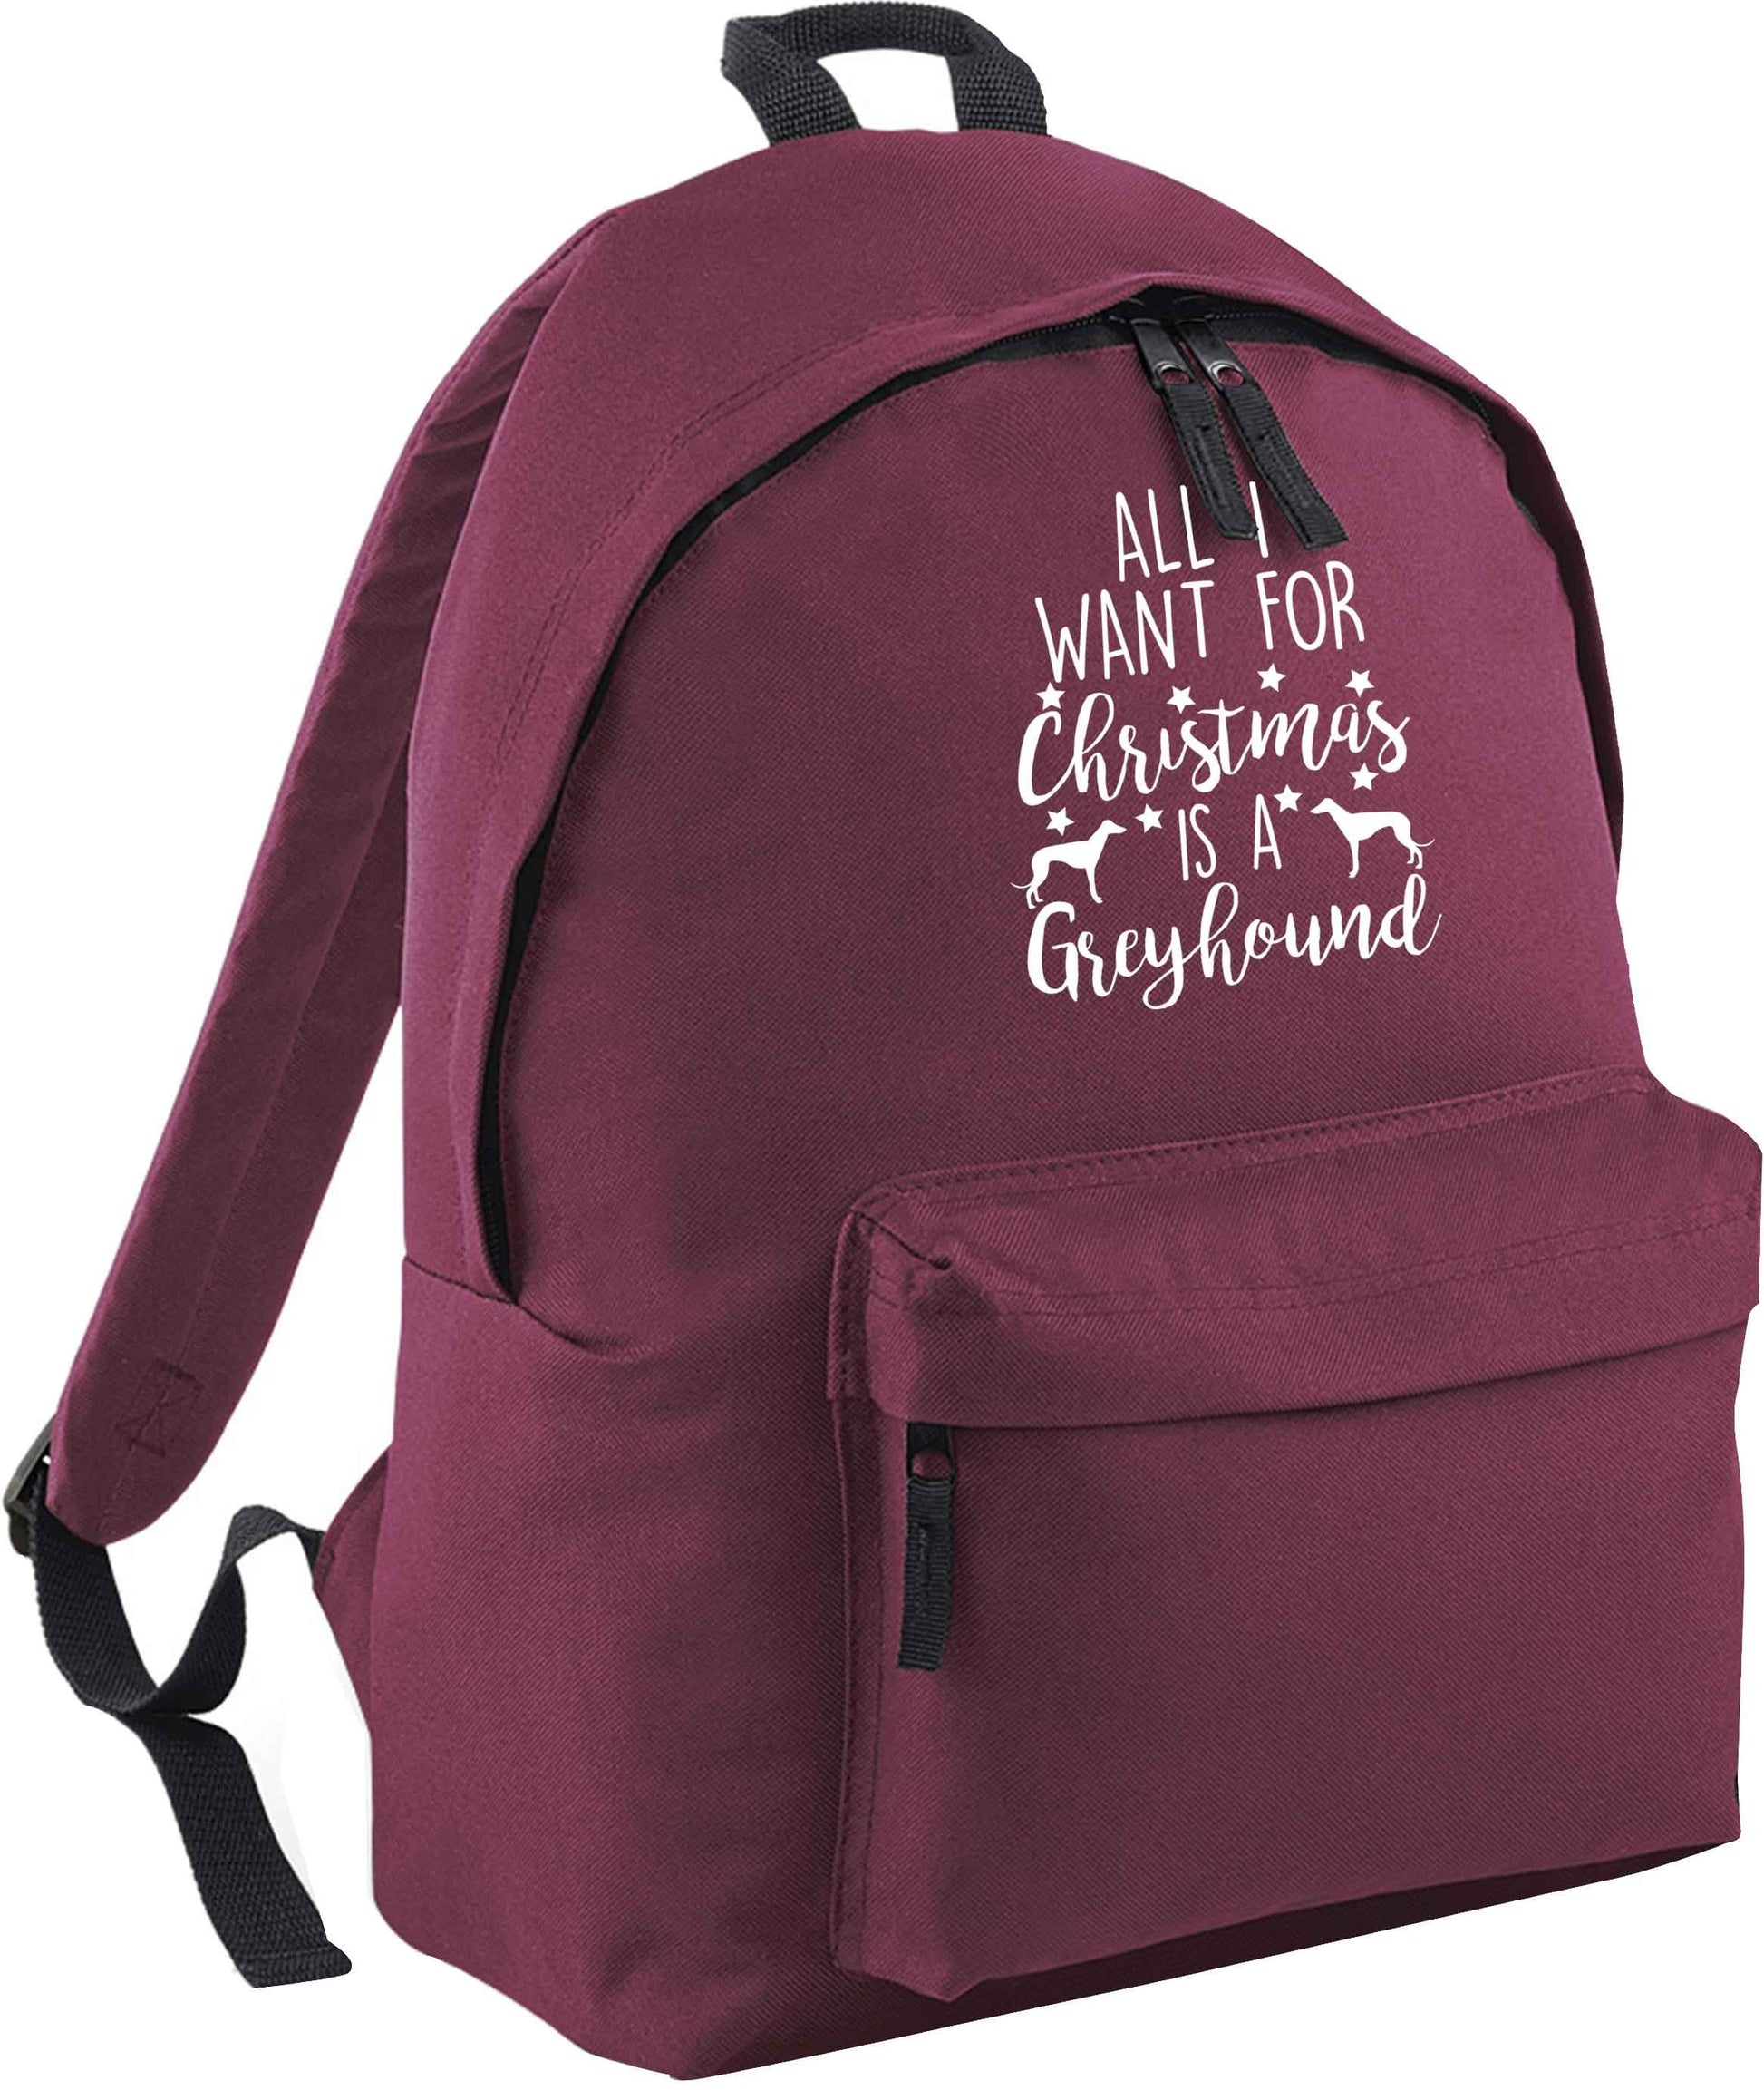 All I want for Christmas is a greyhound maroon adults backpack